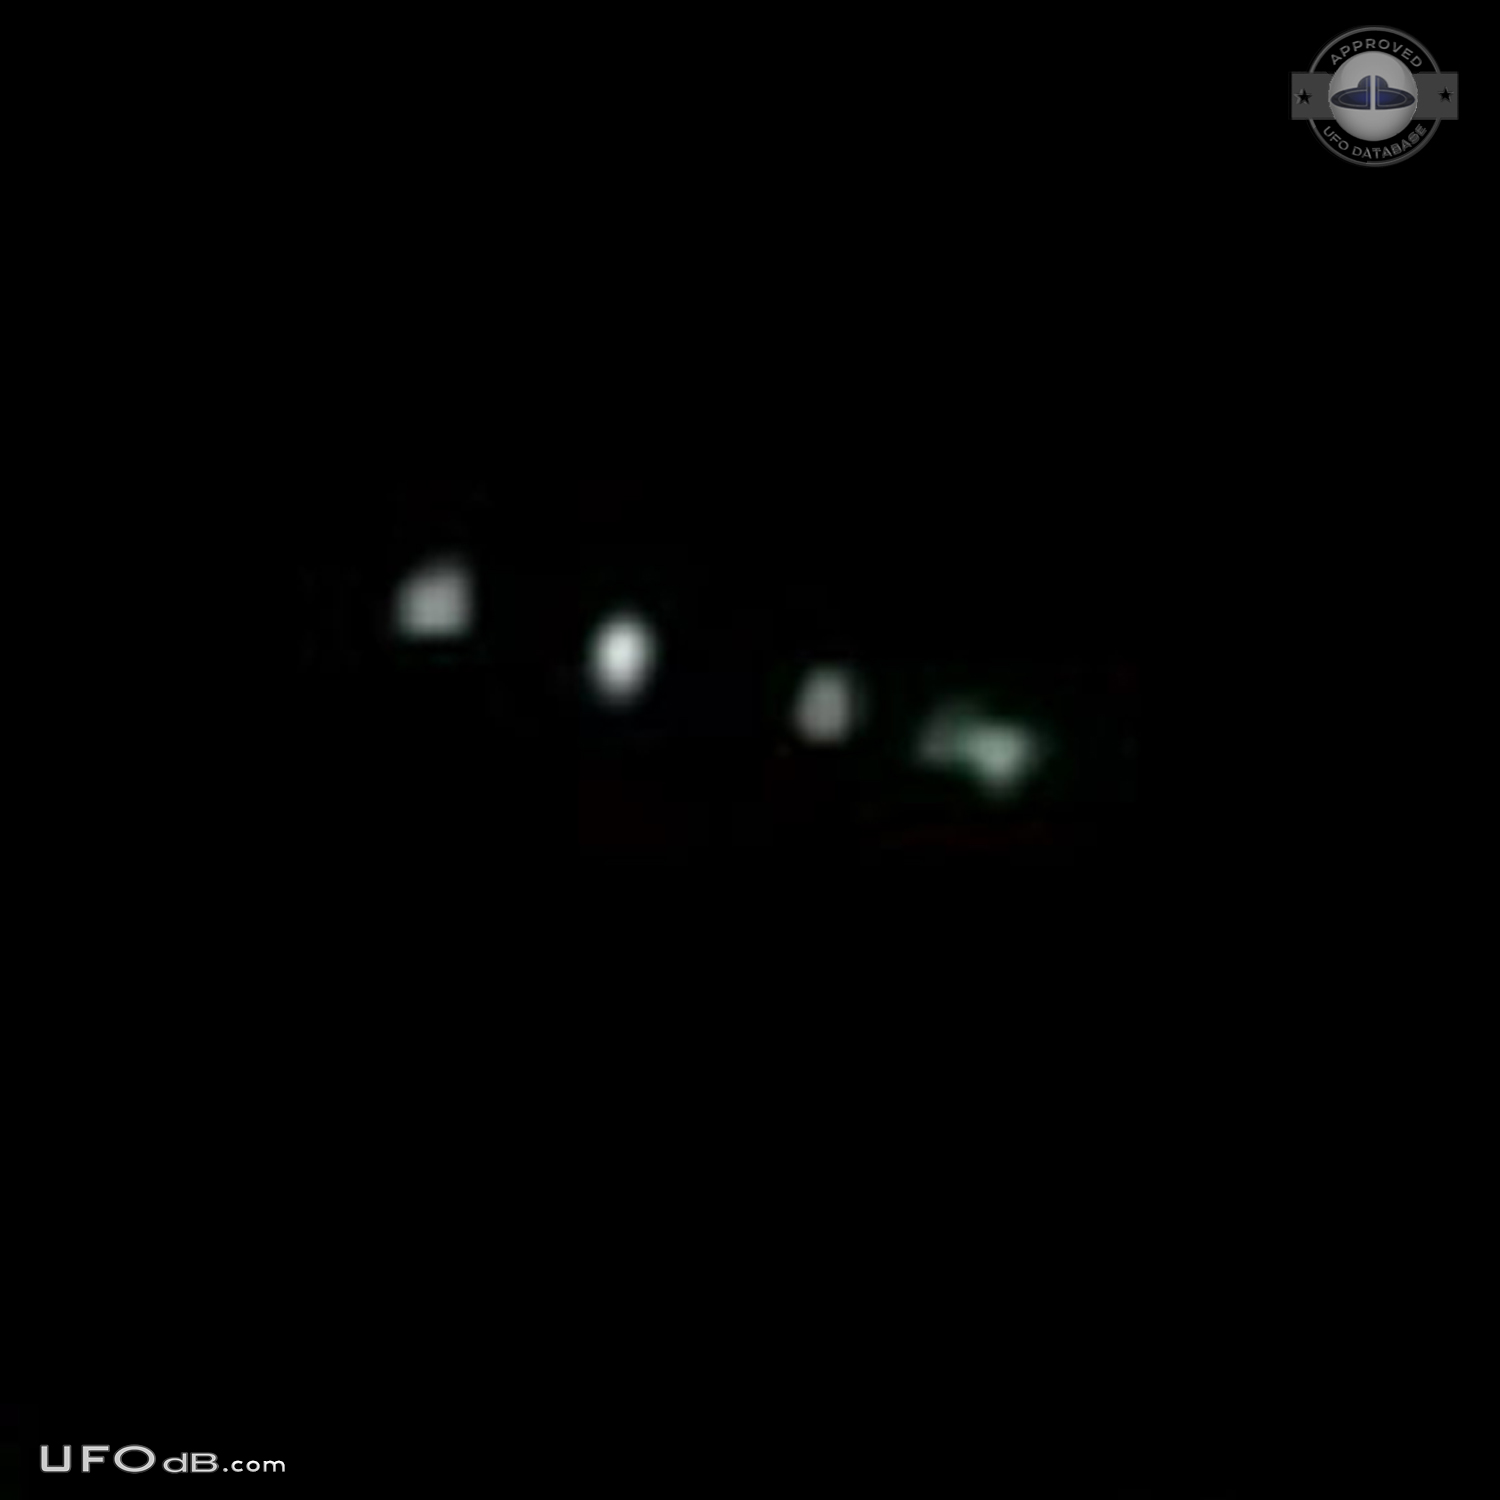 Fleet of 5 bright lights UFOs seen by many witnesses in Johannesburg UFO Picture #487-3